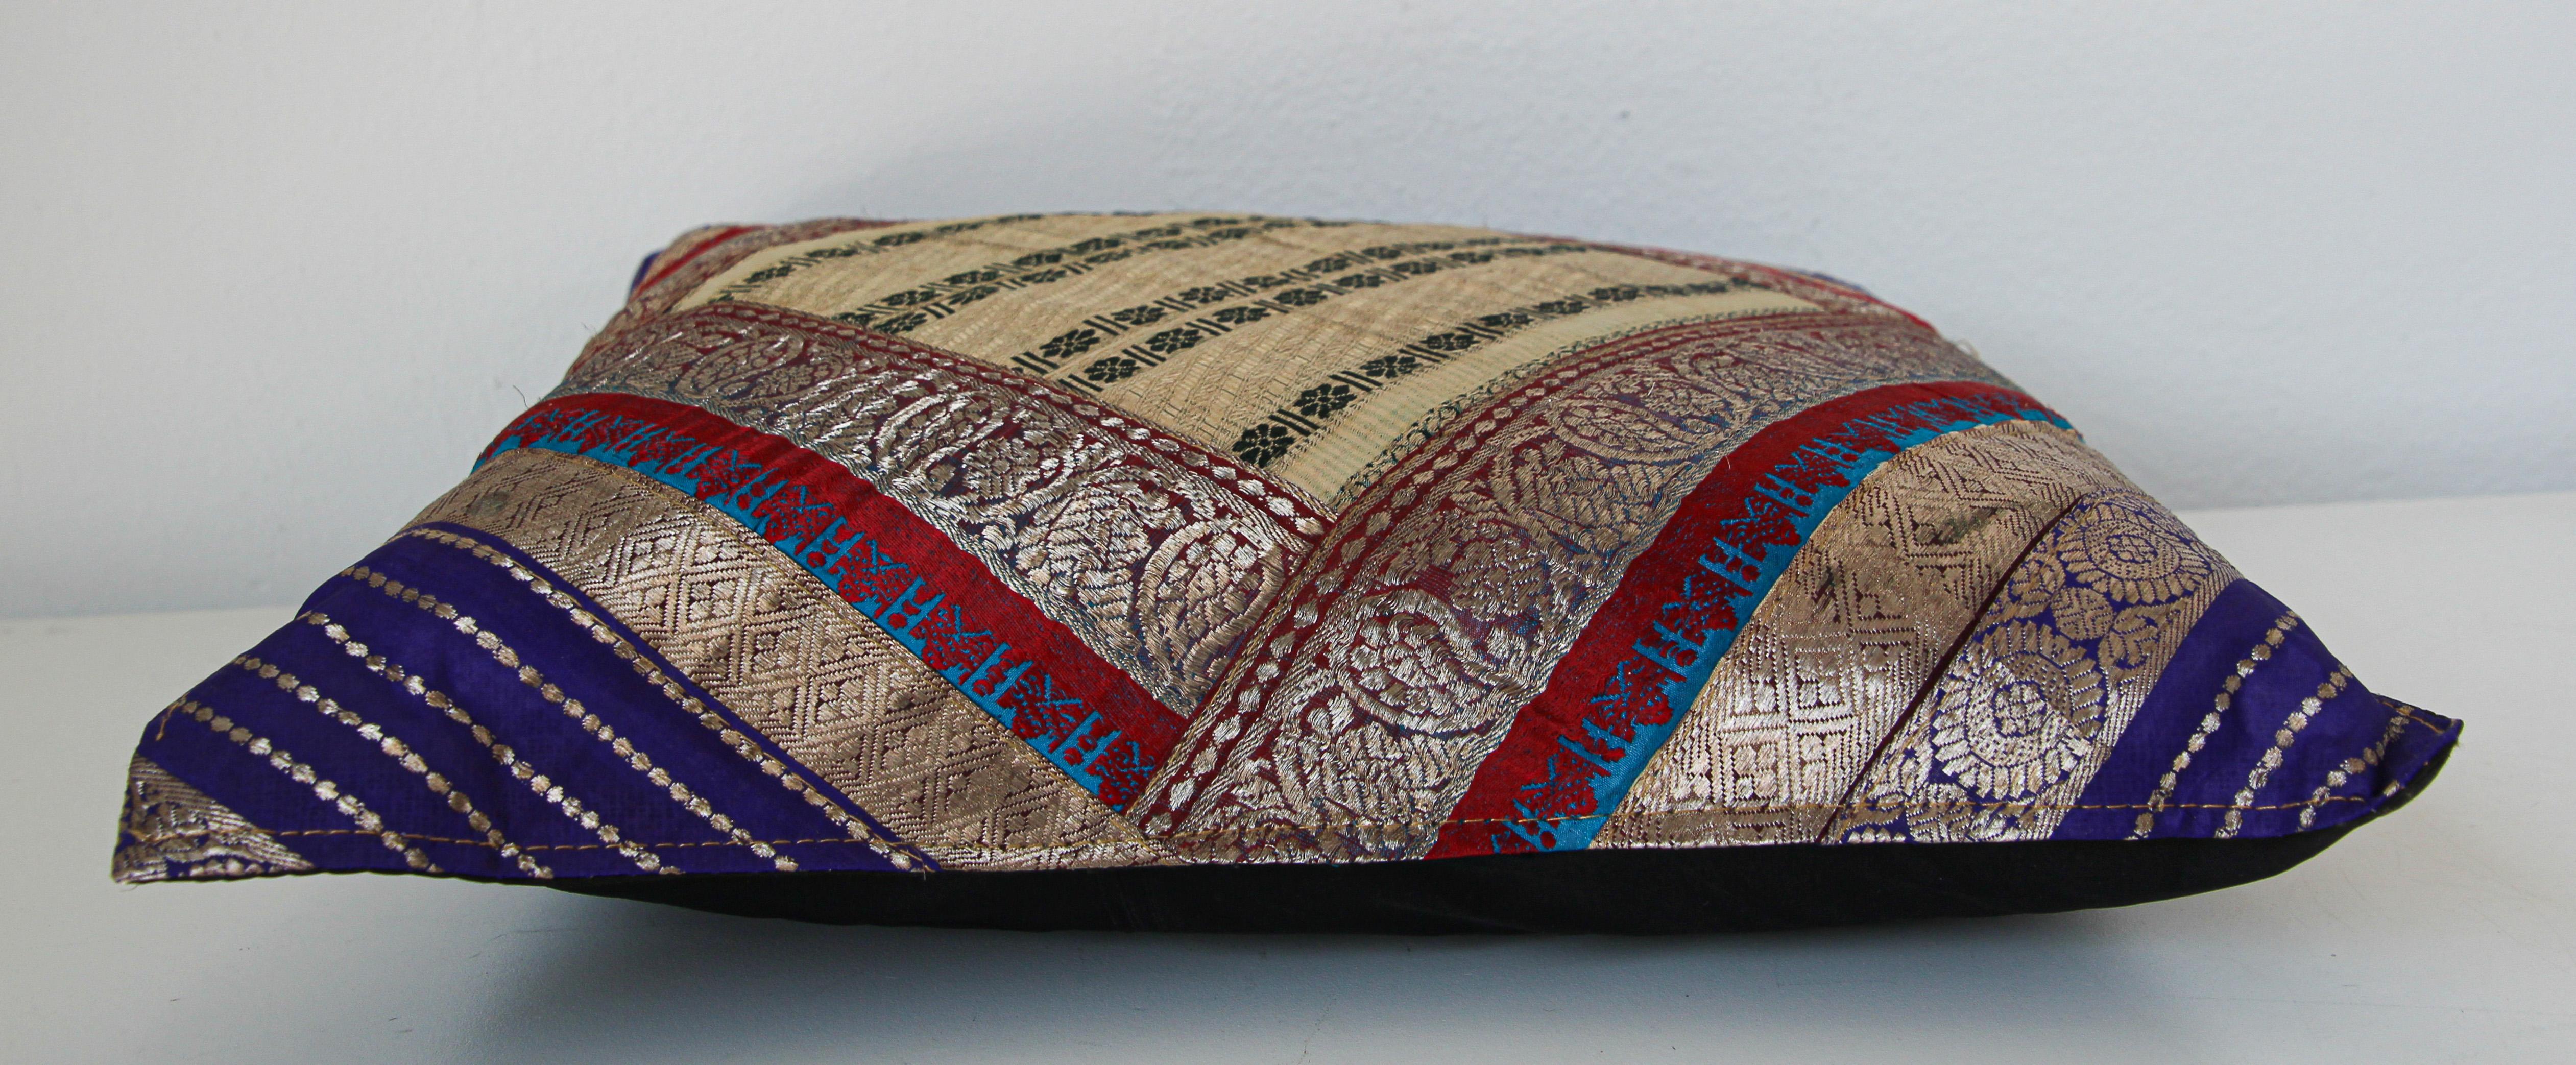 Hand-Crafted Decorative Trow Pillow Made from Vintage Sari Borders, India For Sale